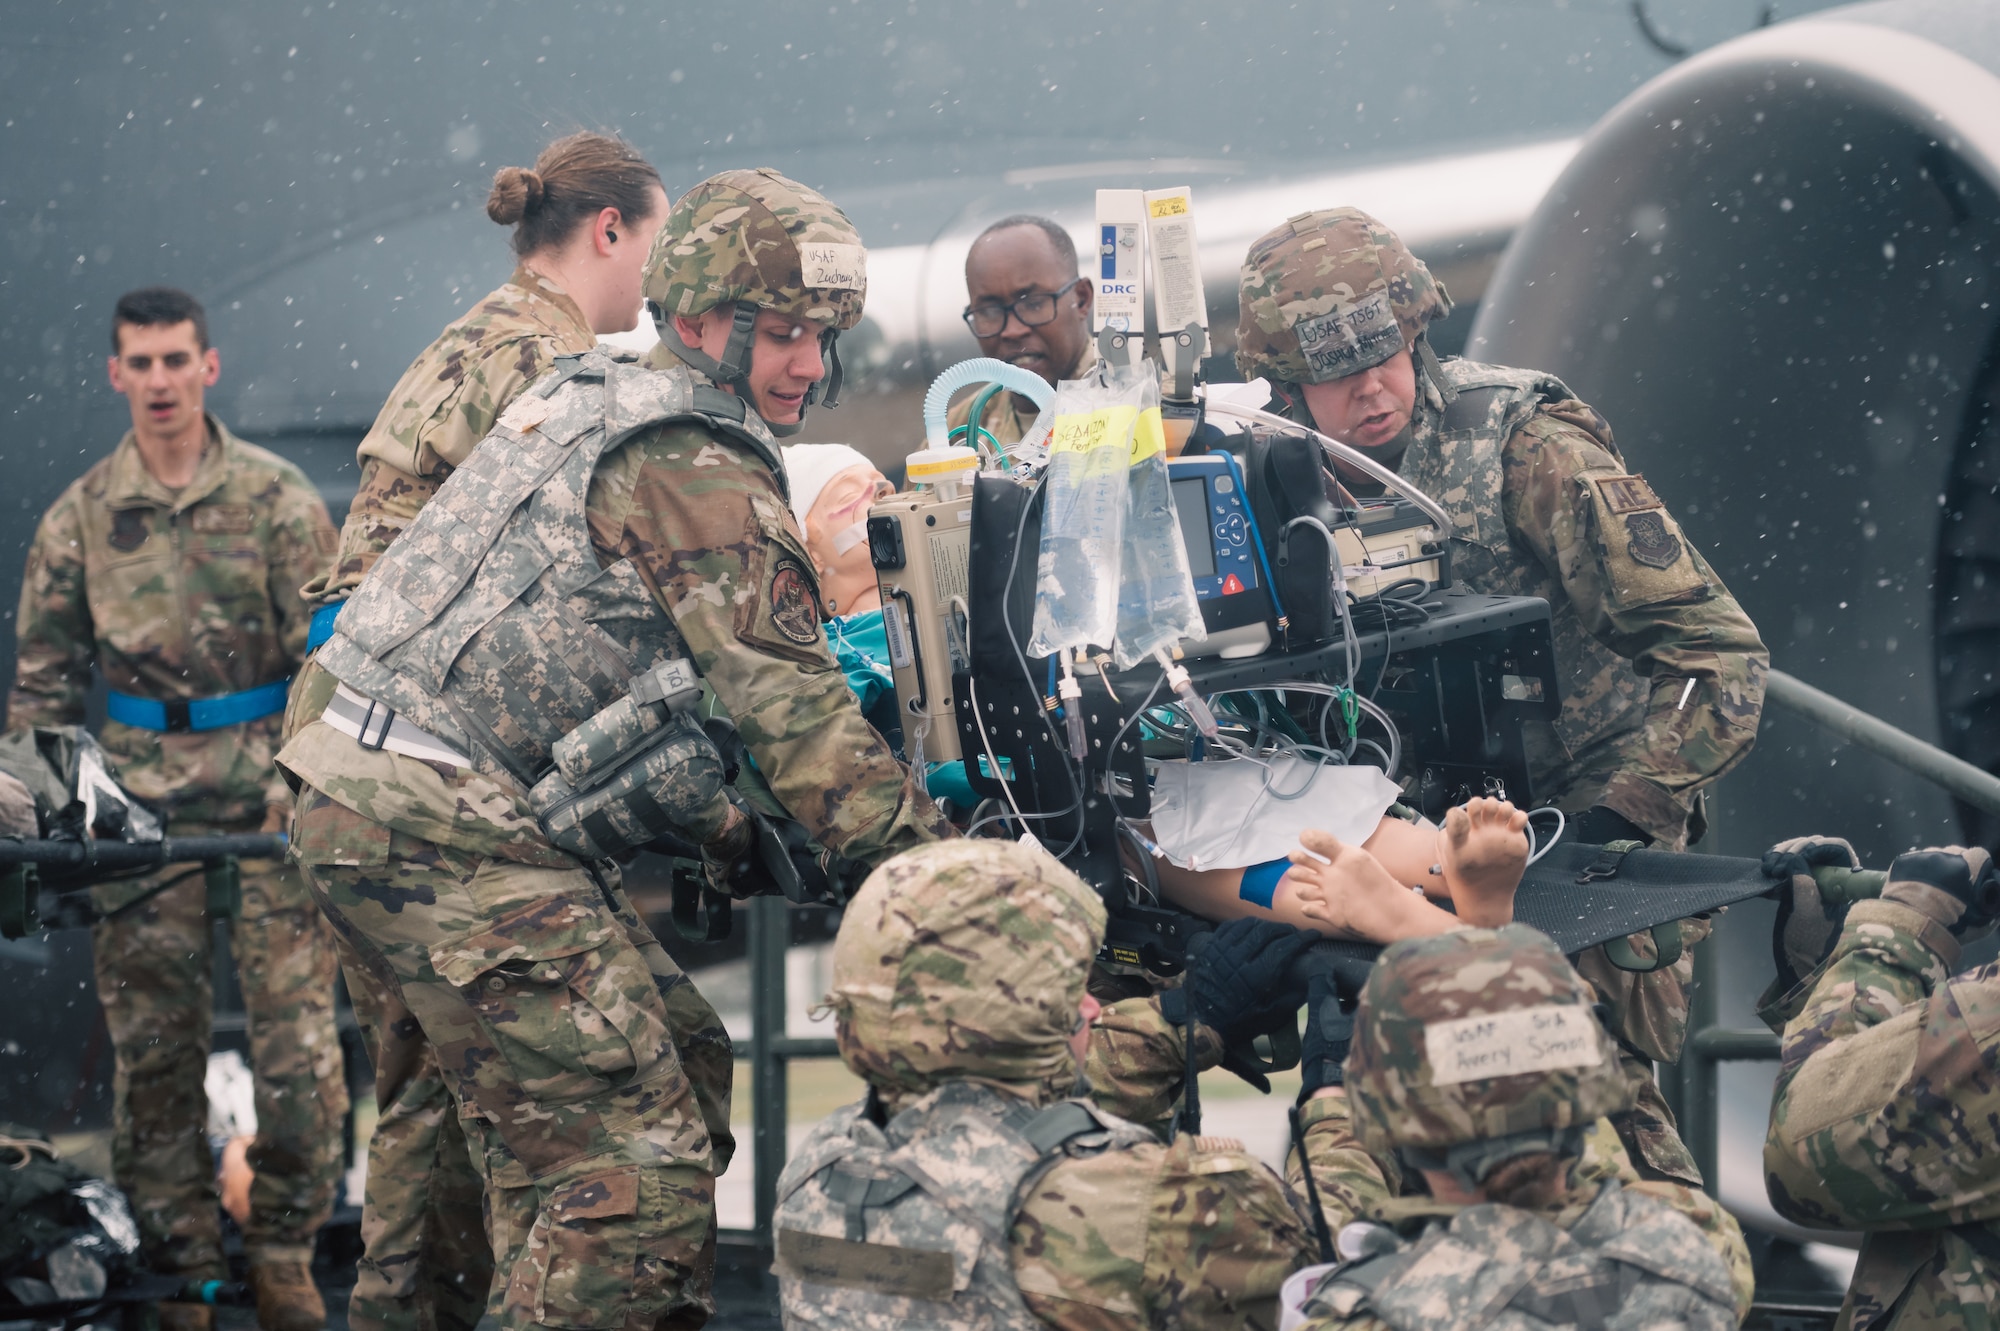 Airmen load simulated patient onto aircraft